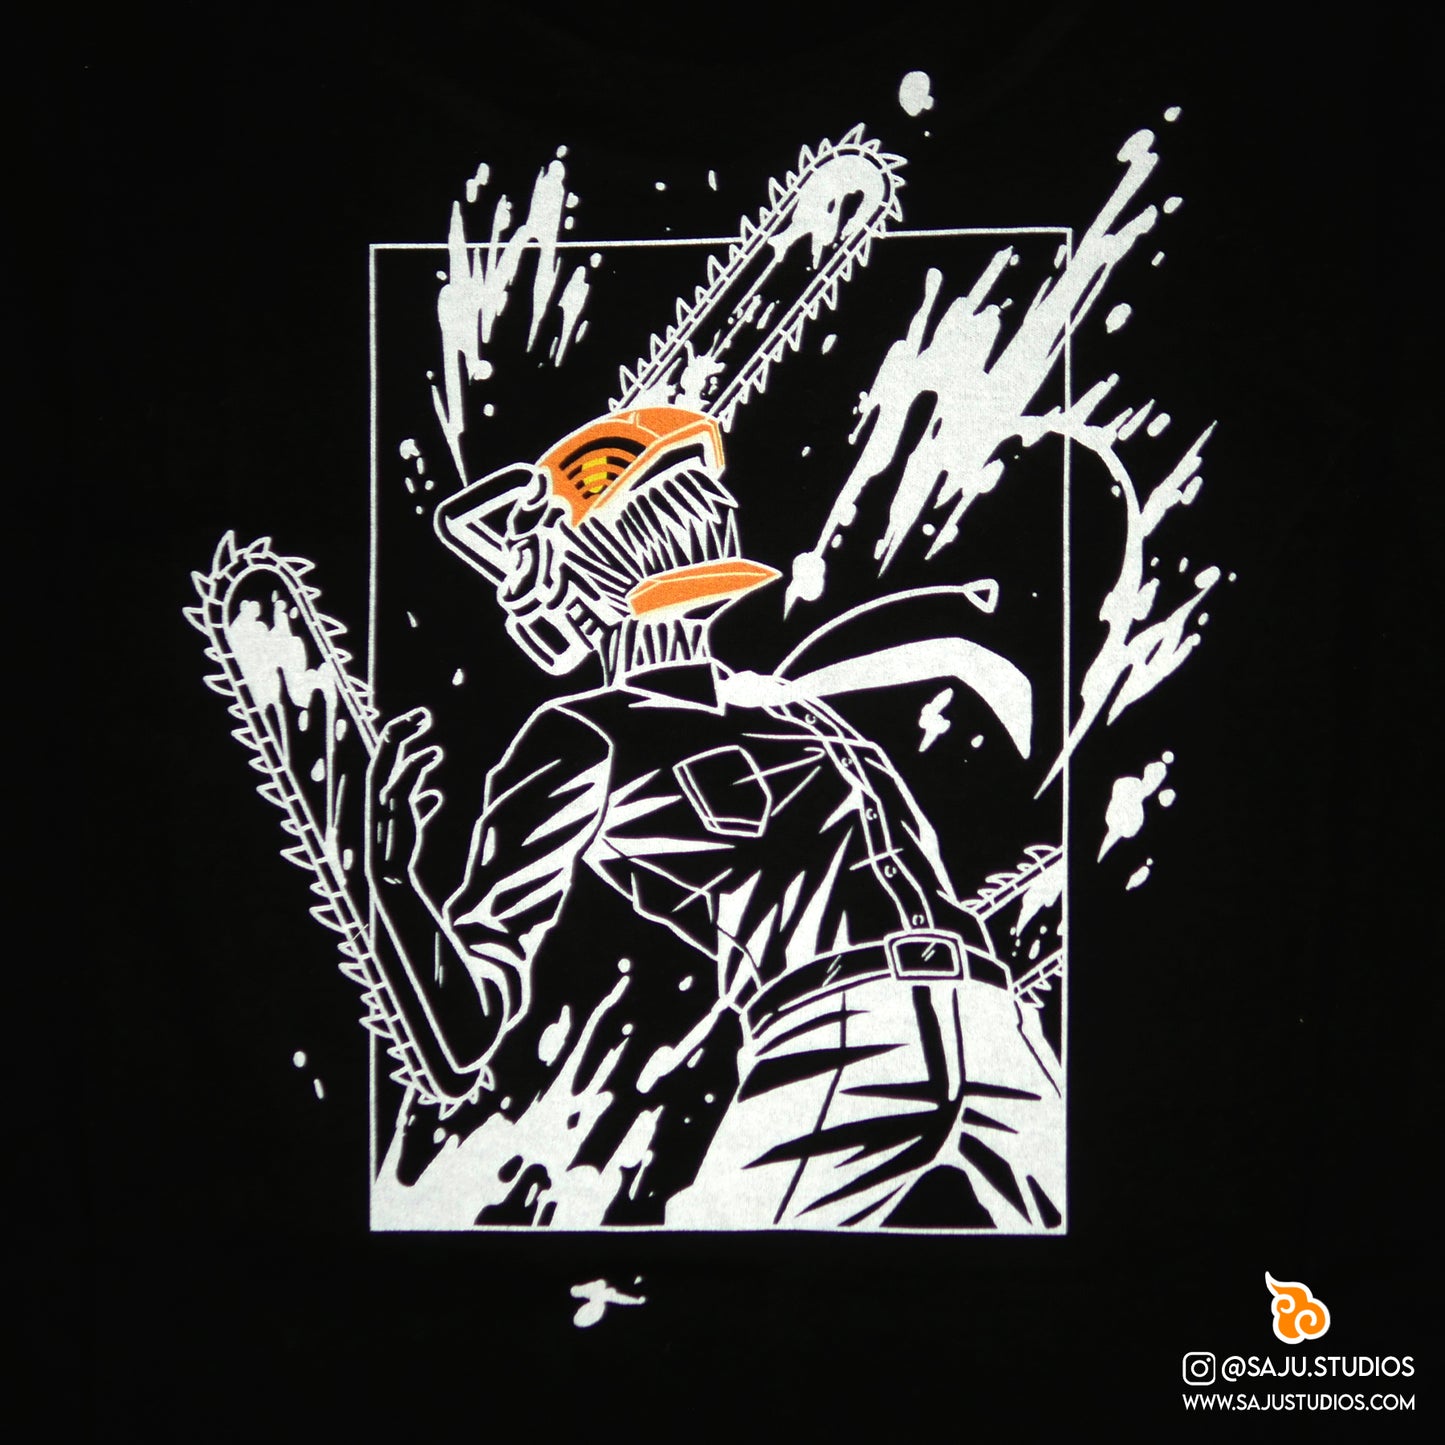 Embroidered Chainsaw Man Shirt